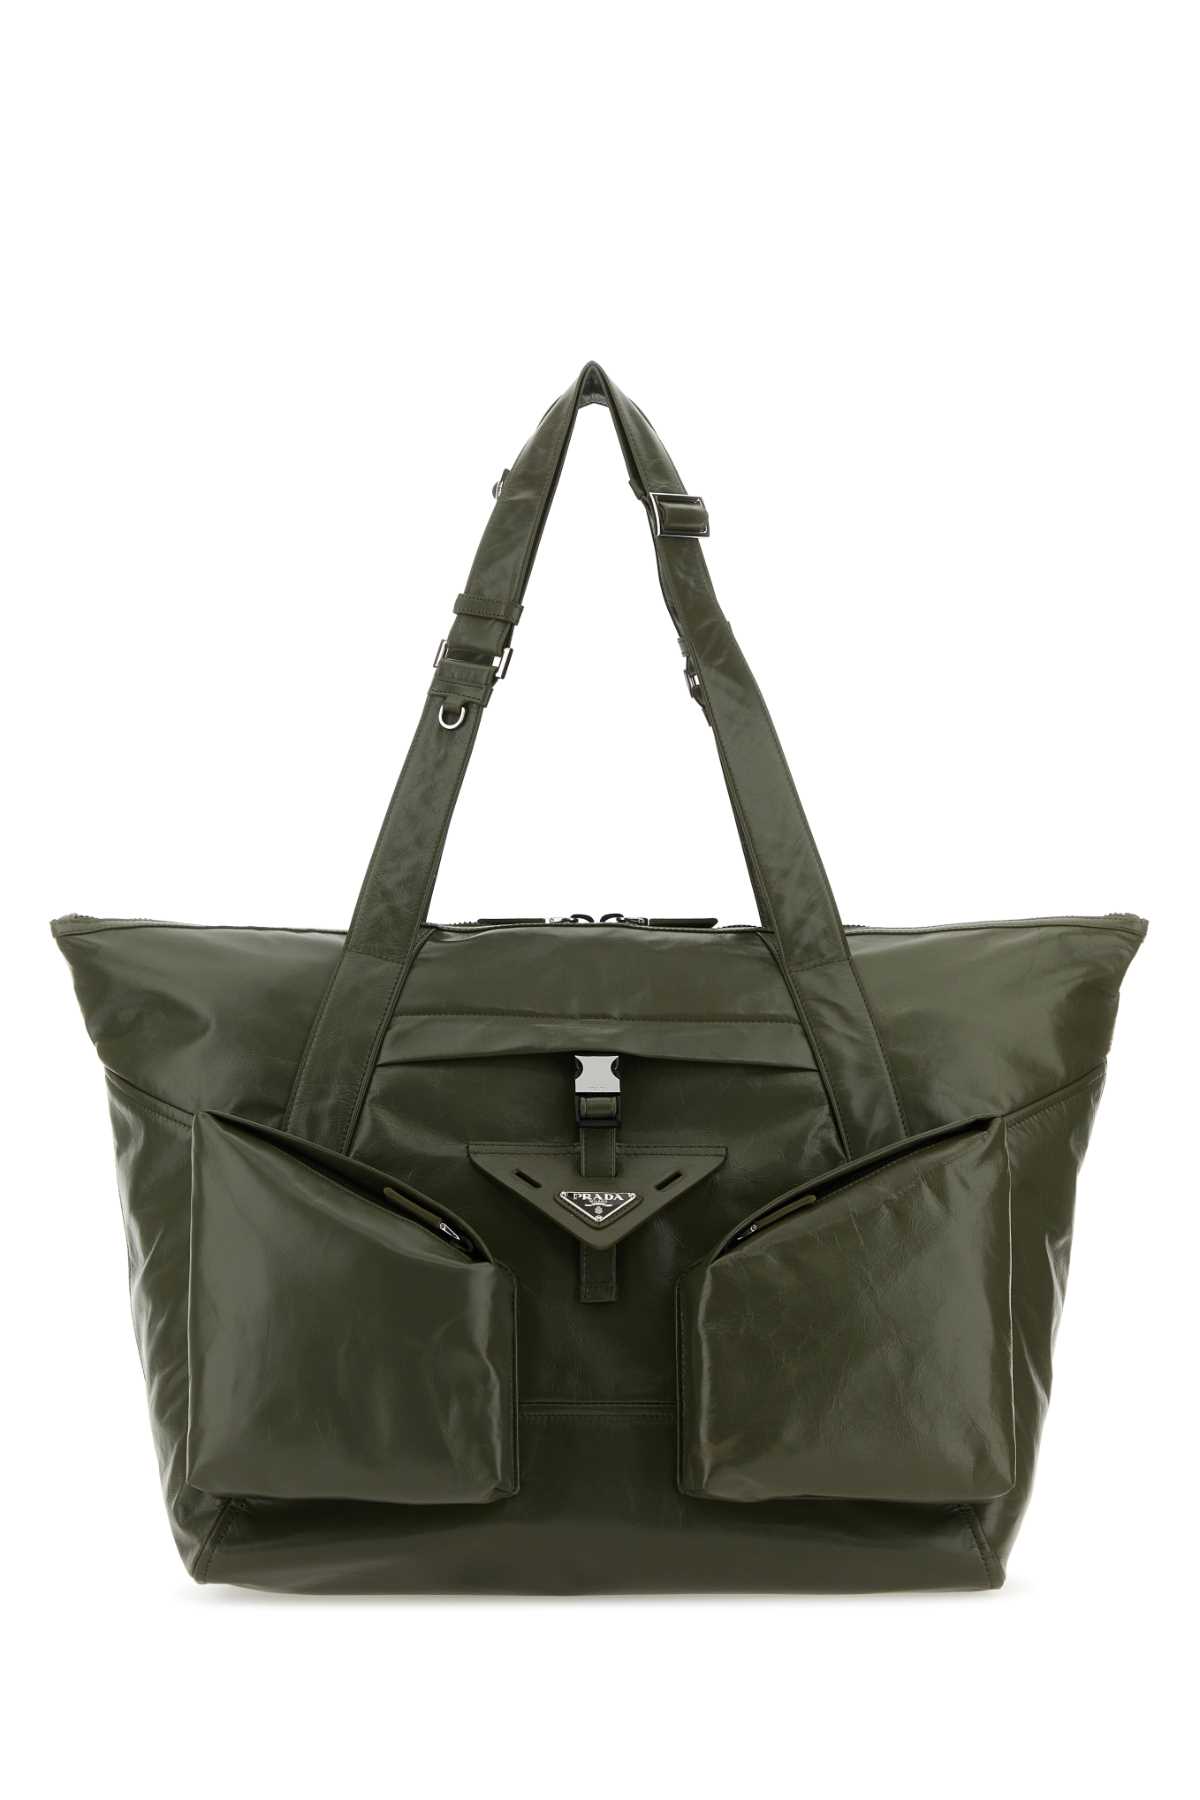 Prada Olive Green Leather Shopping Bag In Loden